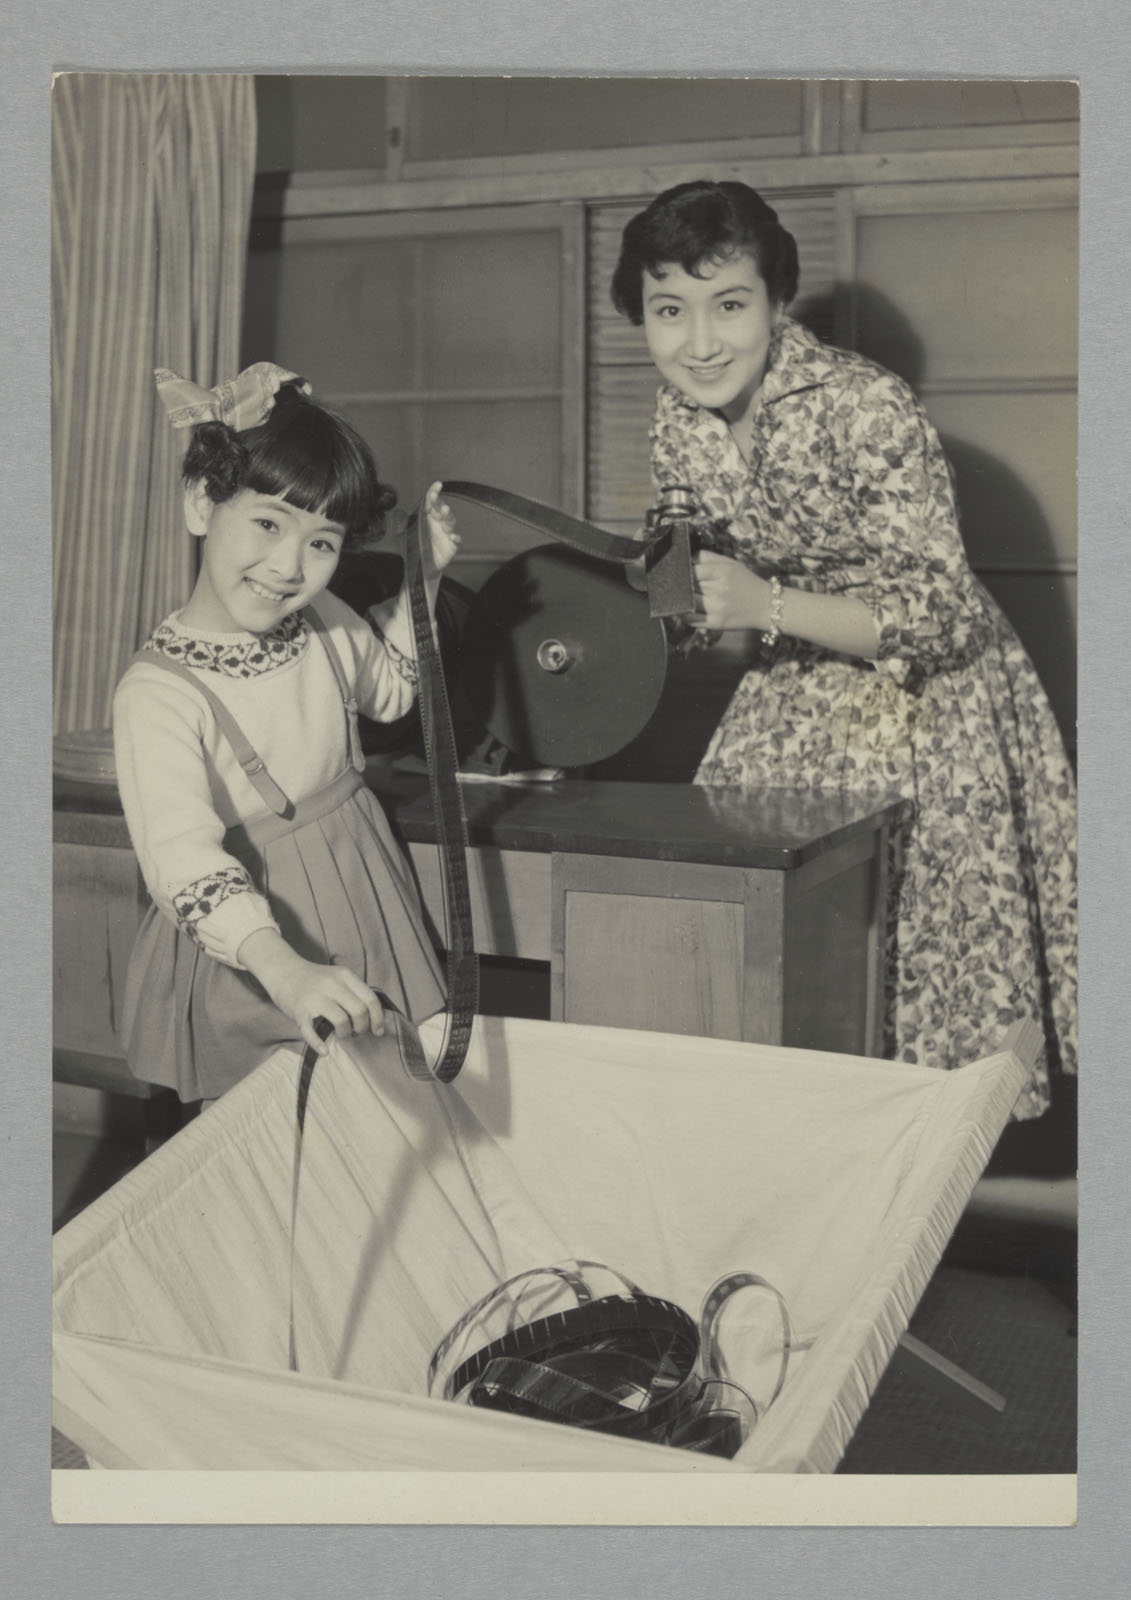 Having one-day assistants in the Ofuji Studio (1958)